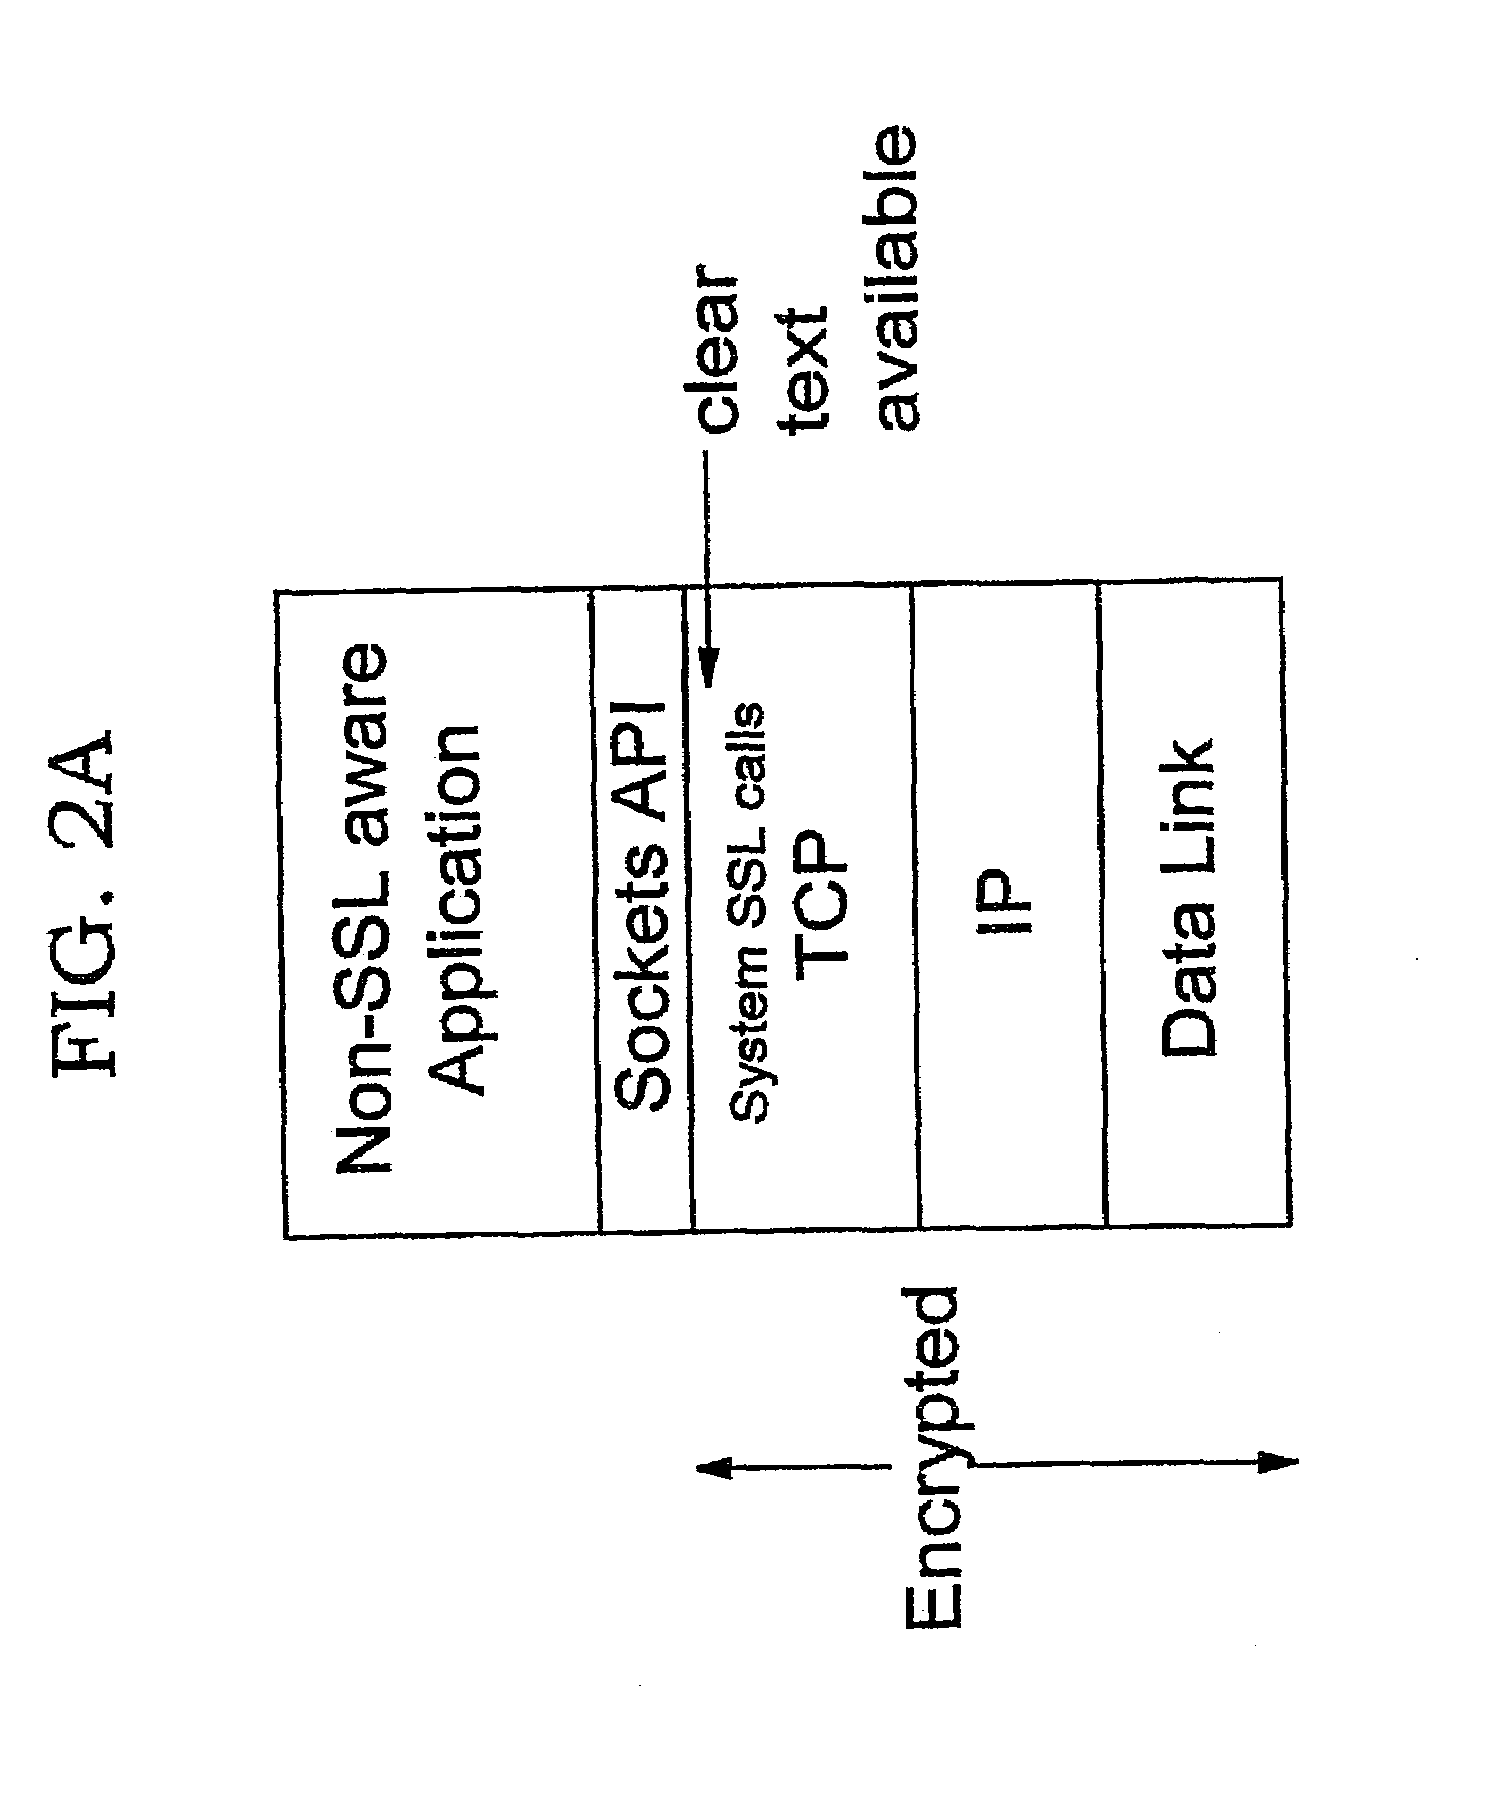 Offload Processing for Secure Data Transfer